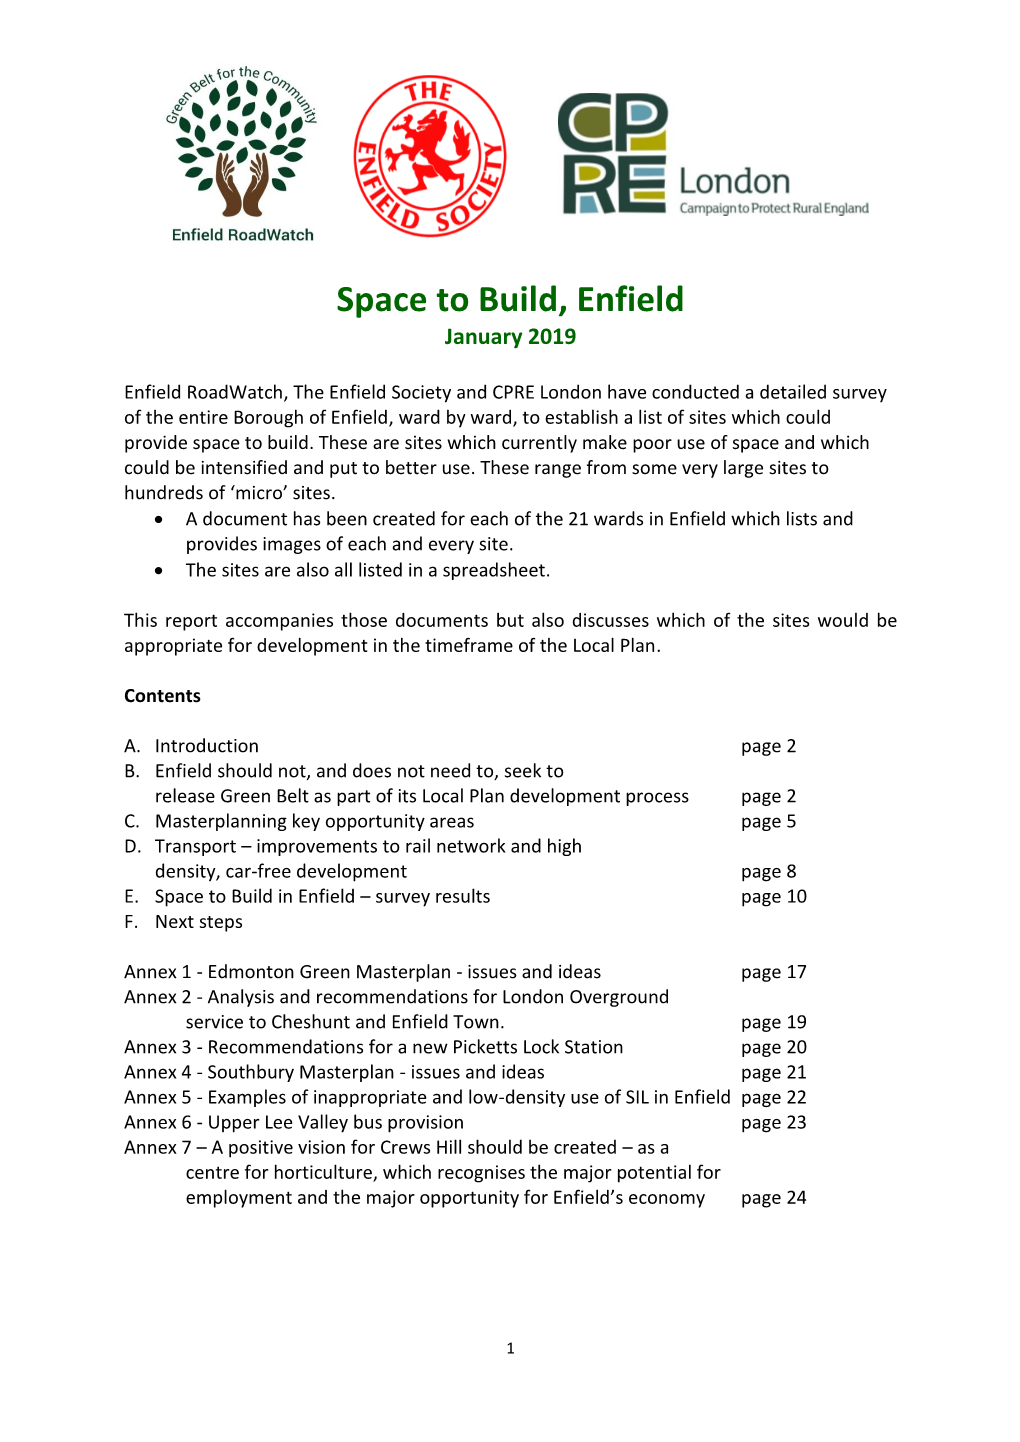 Space to Build, Enfield January 2019